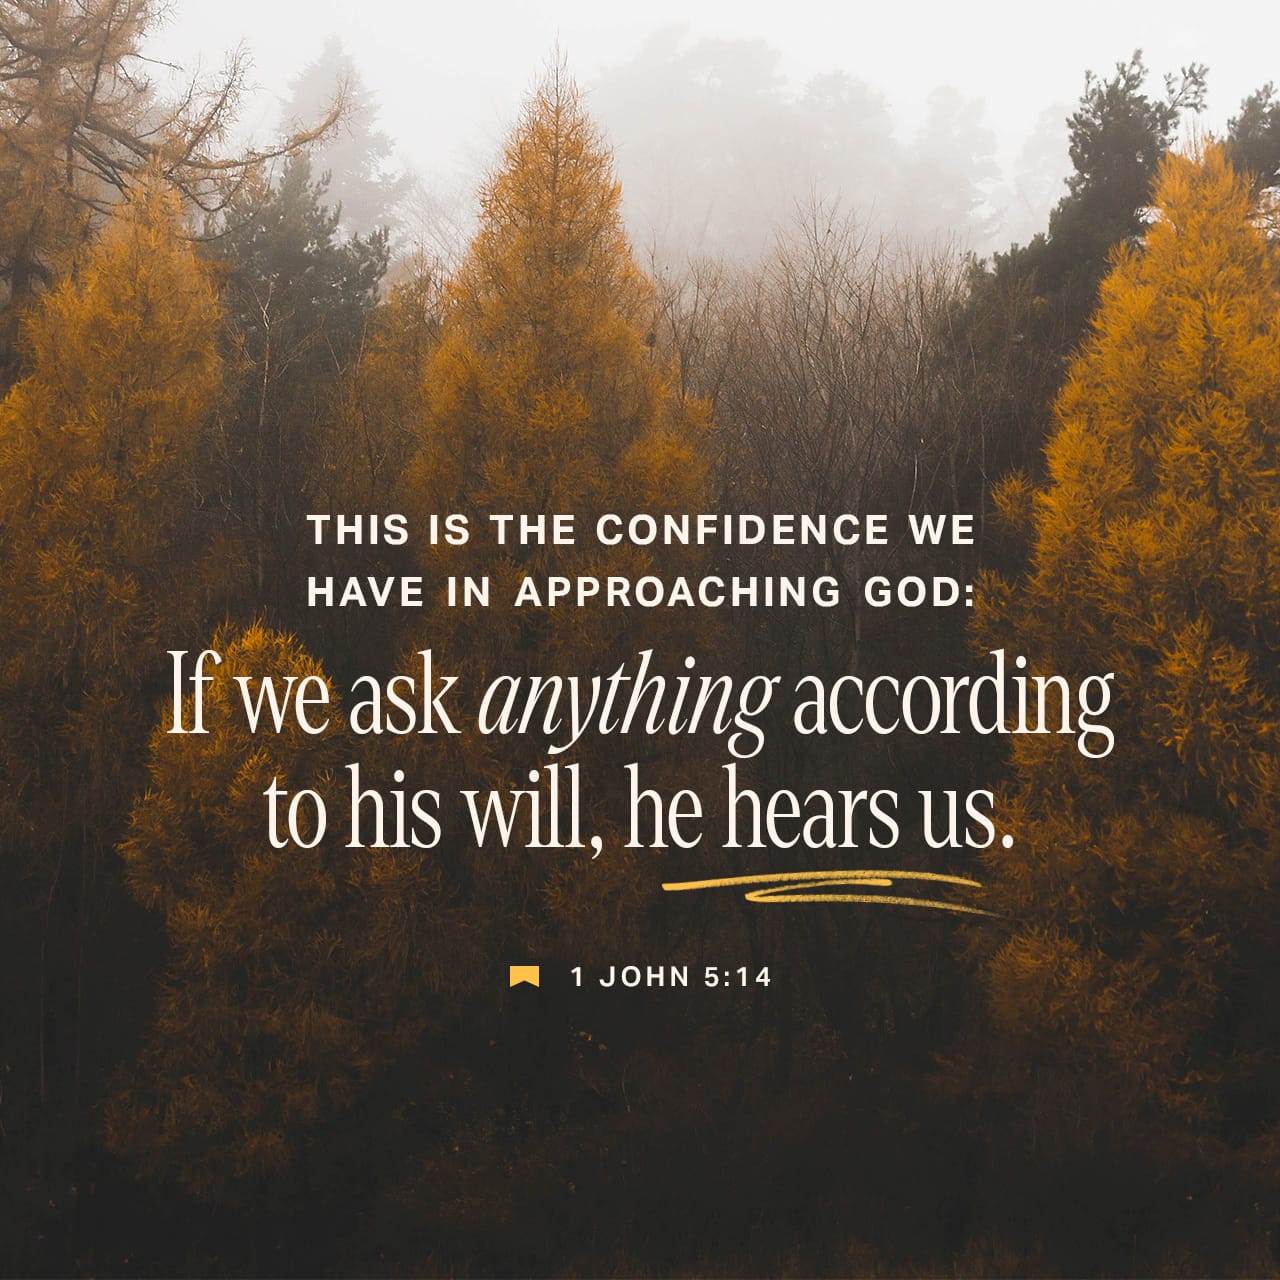 I John 5:14-15 Now this is the confidence that we have in Him